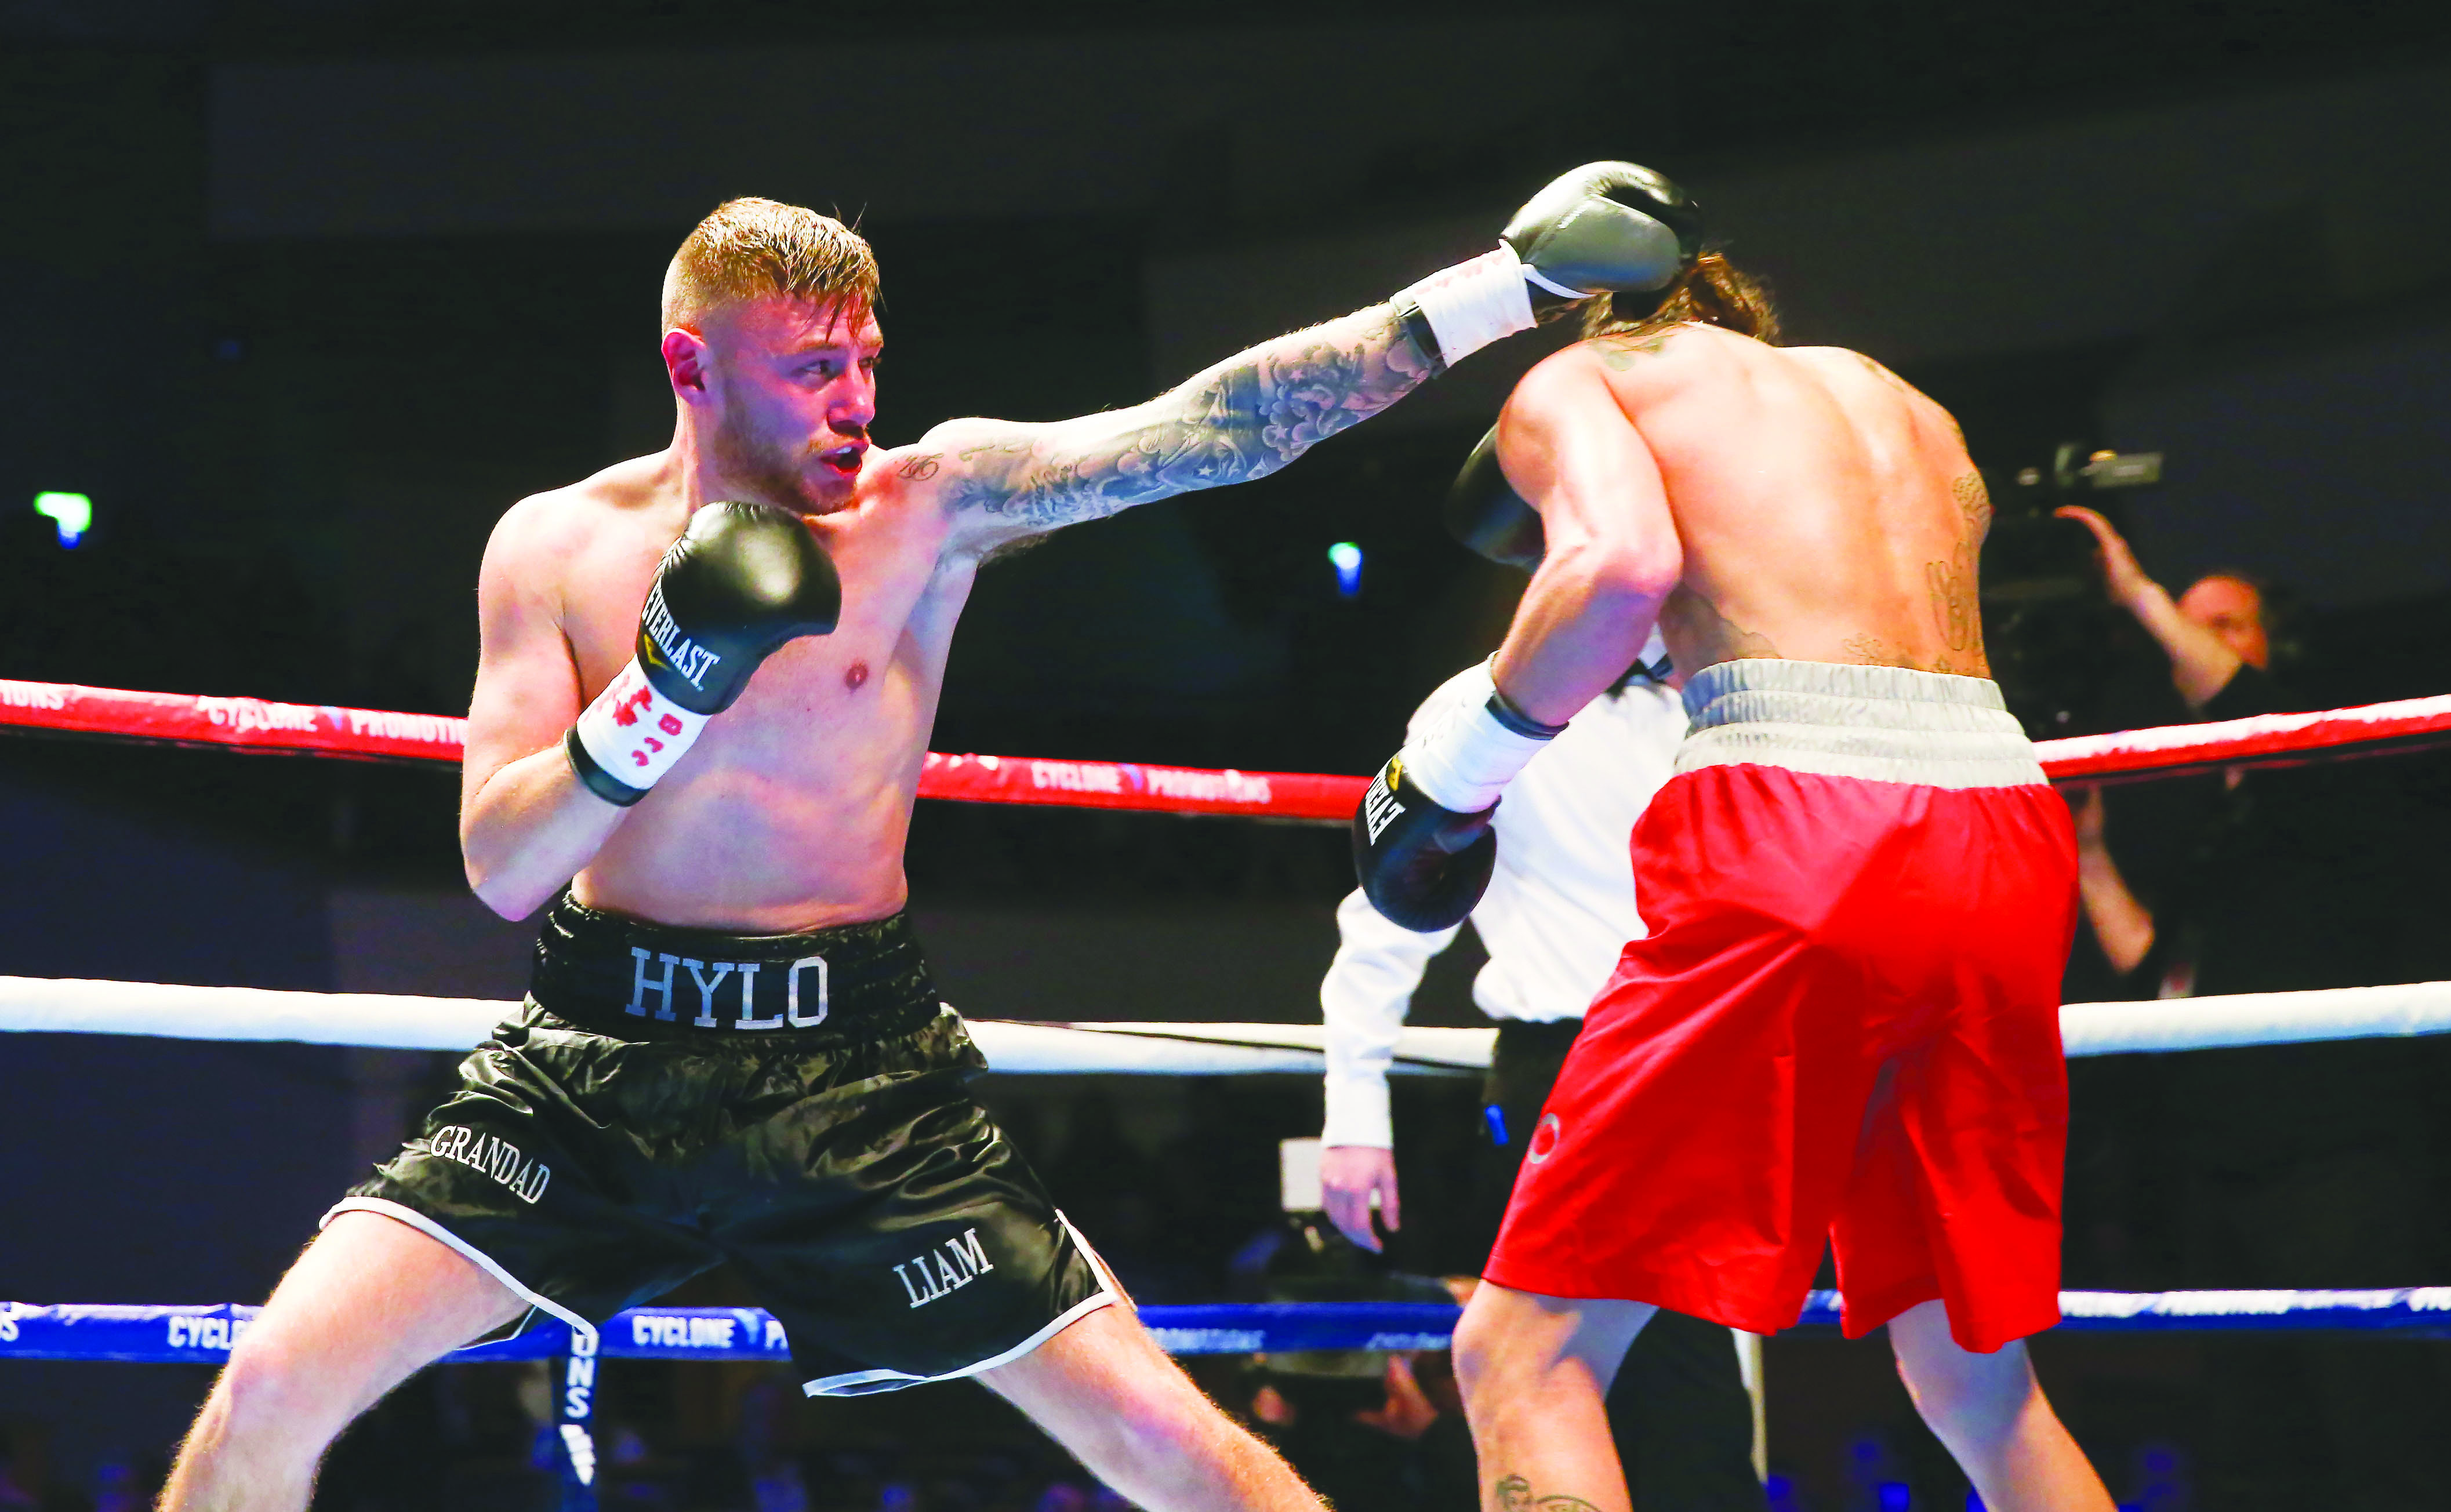 Paul Hyland is hoping victory on Saturday can lead him to the cusp of a British title shot